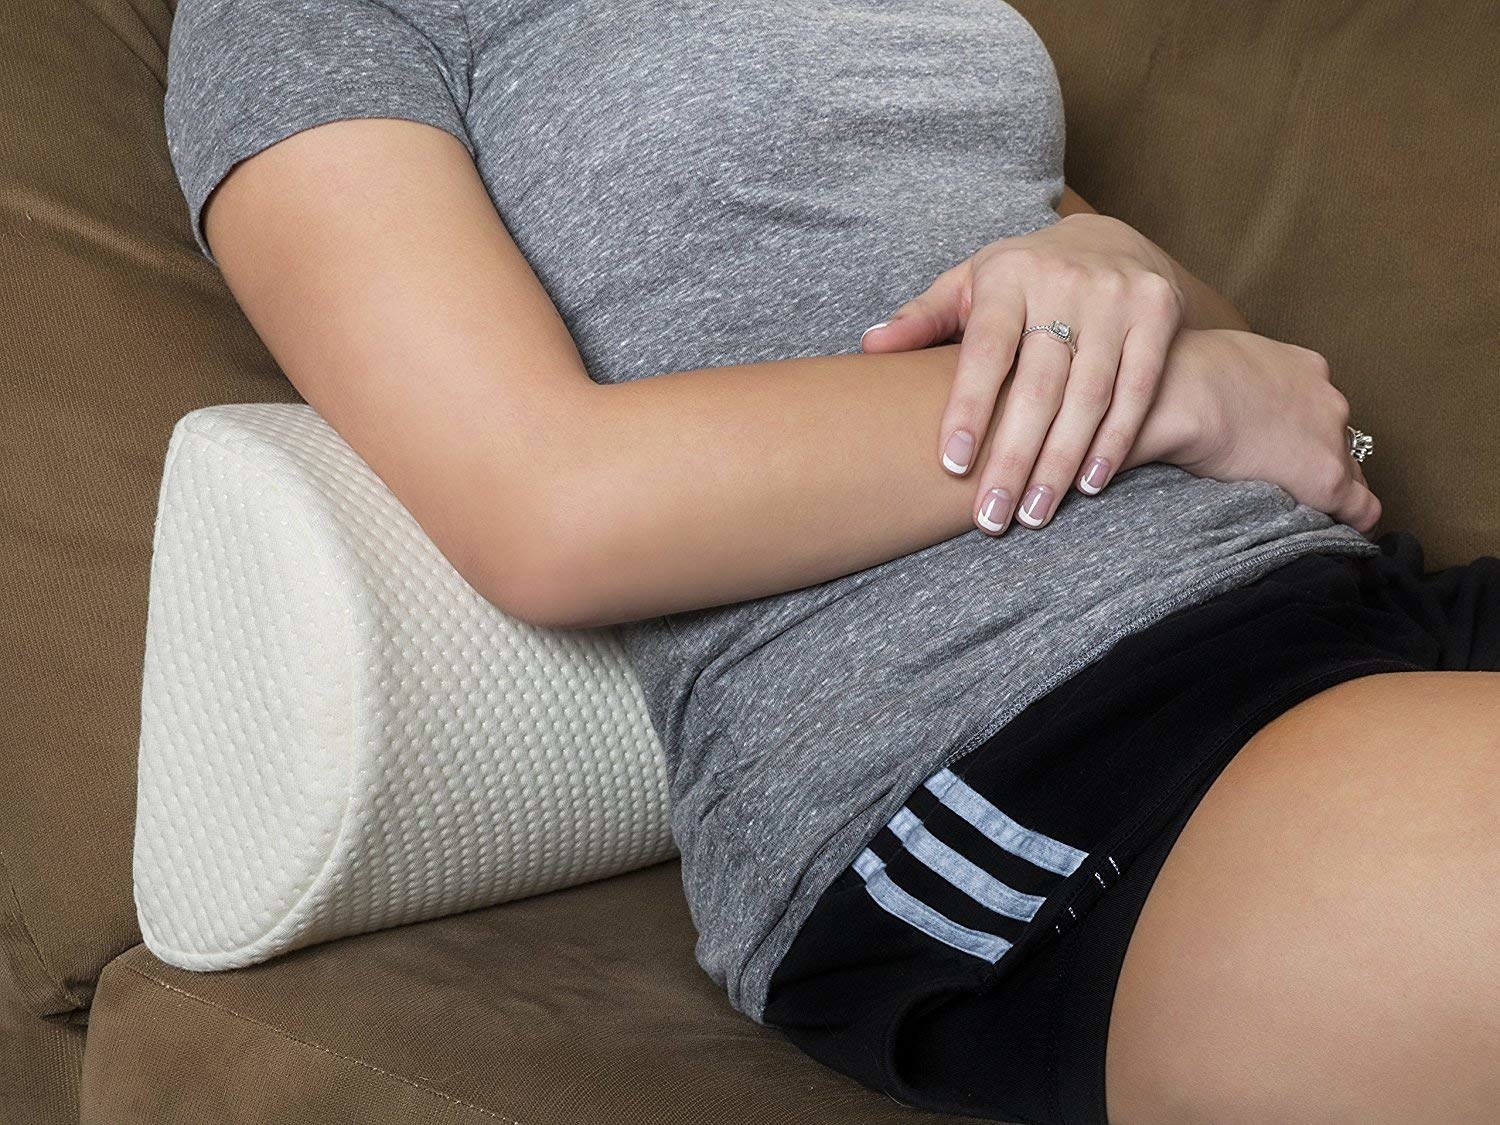 person sitting on a couch with long half-circular pillow used as a lumbar pillow